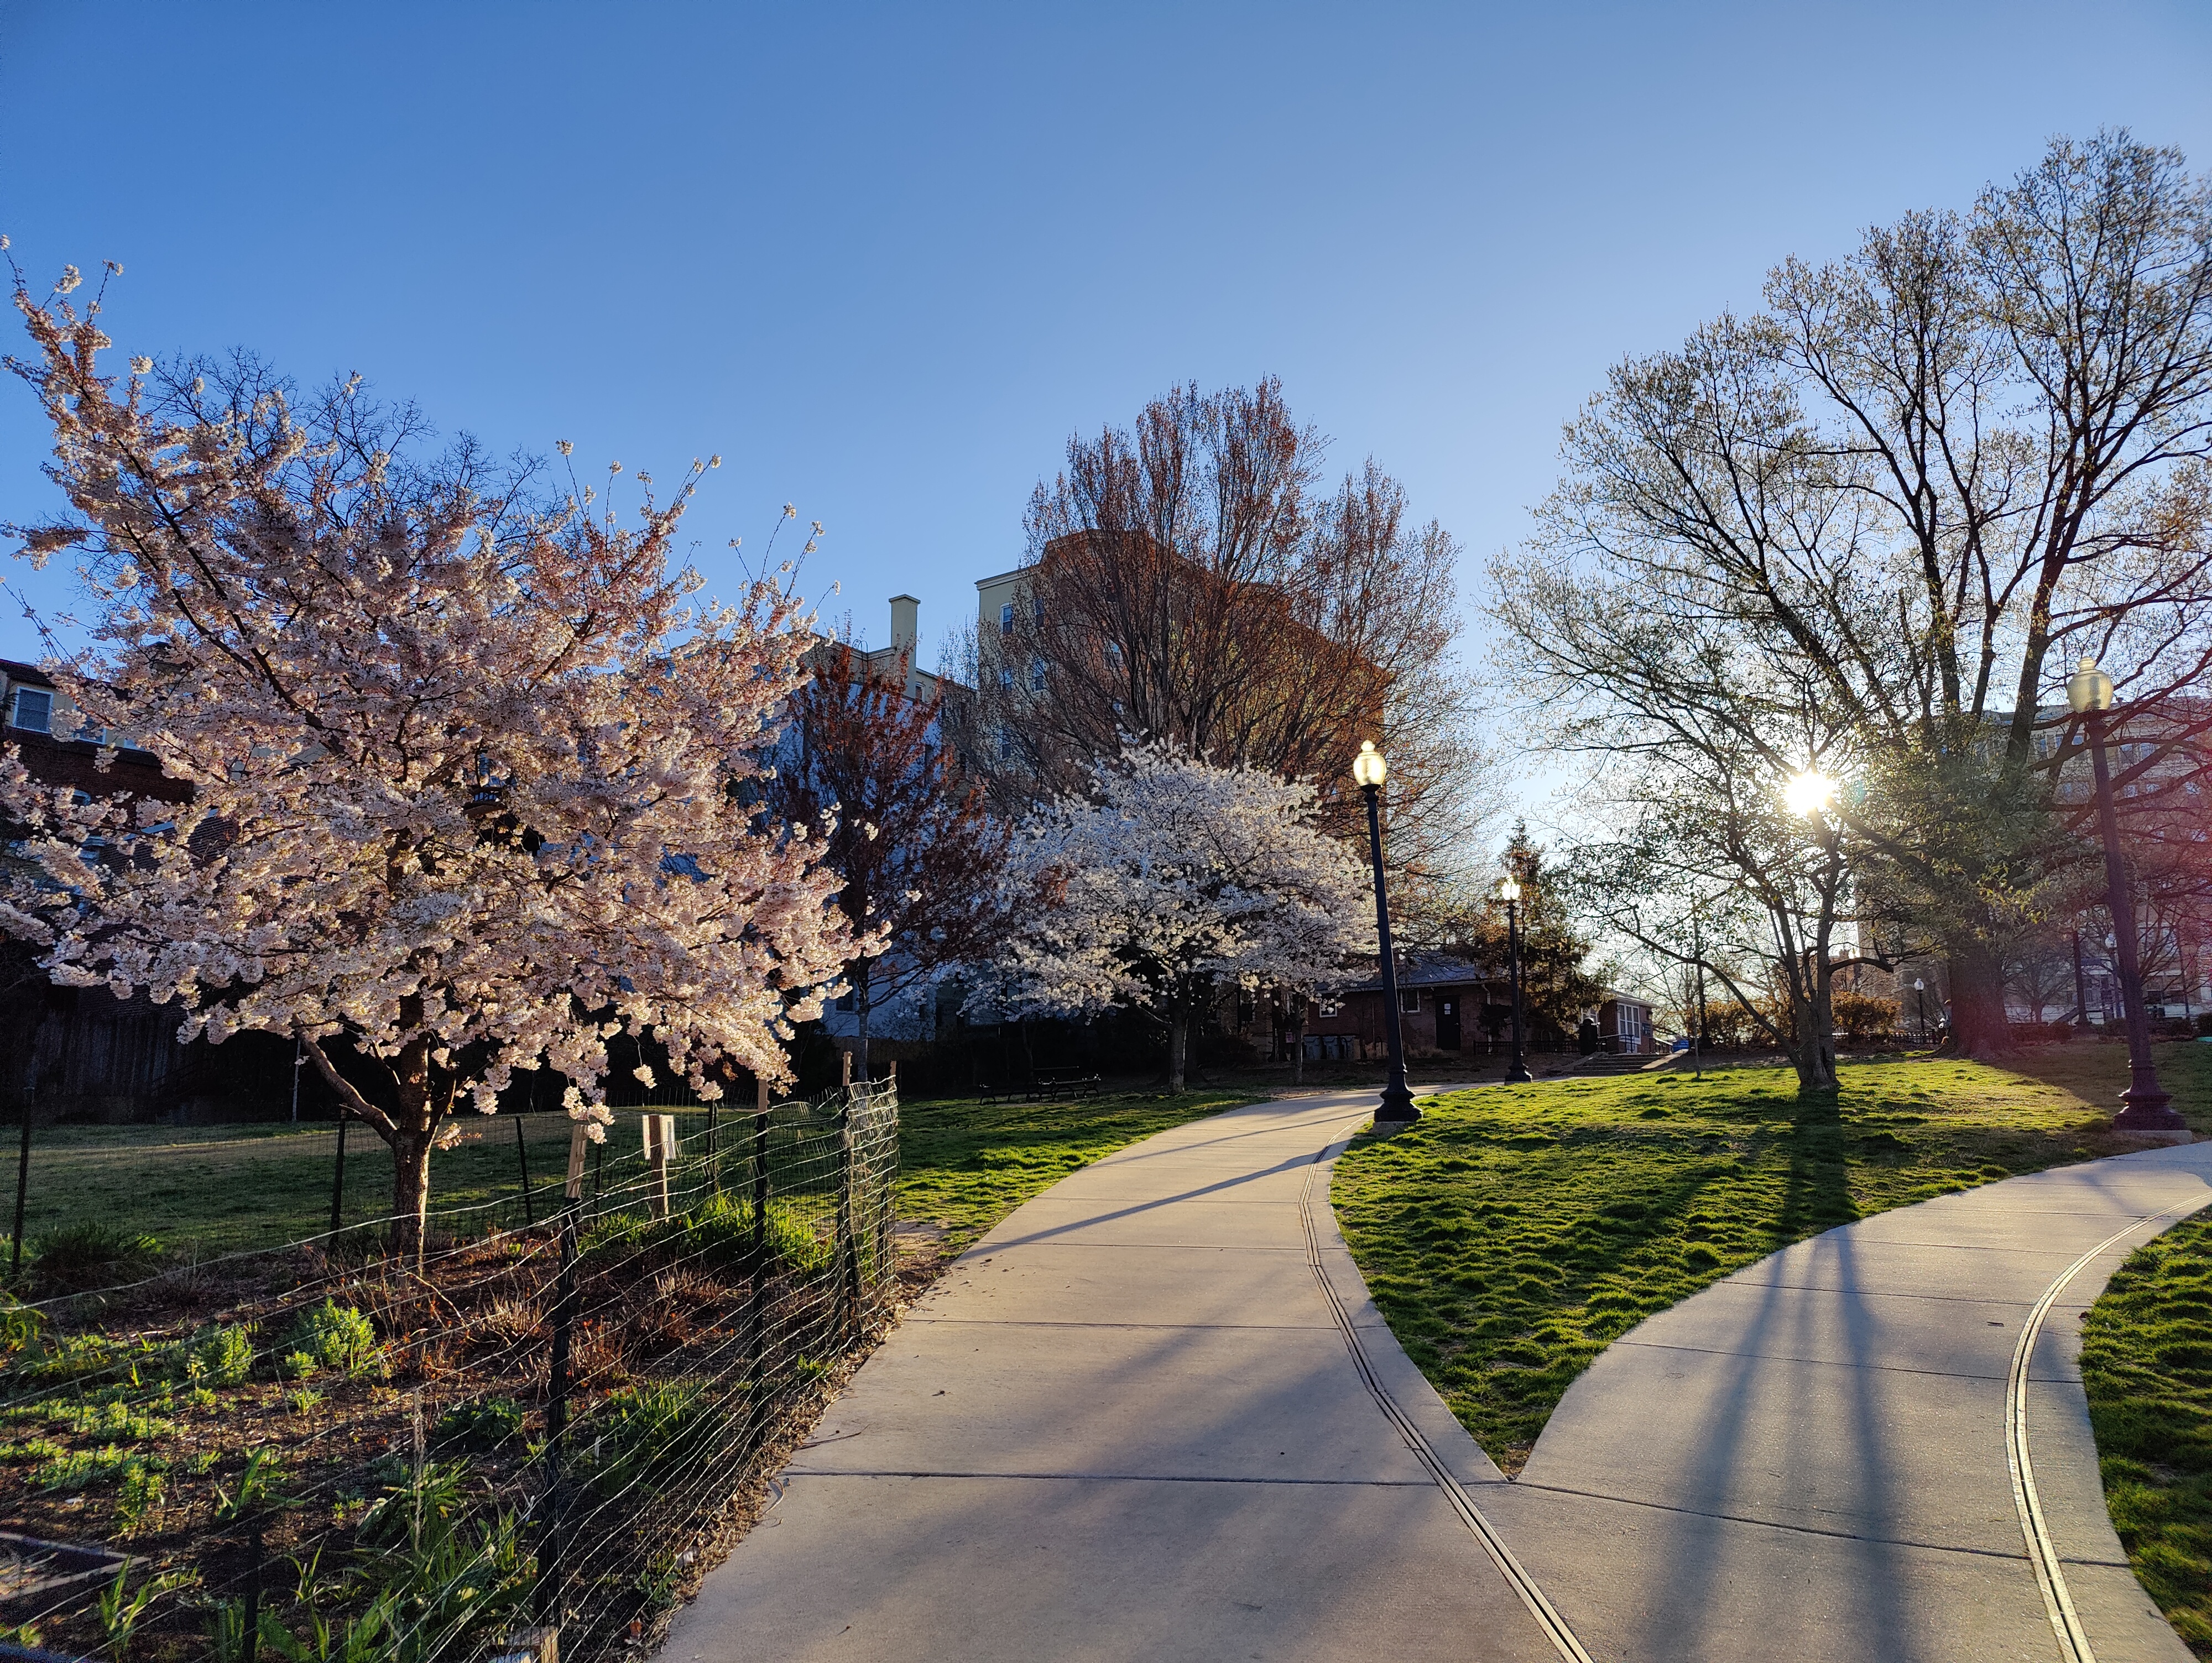 Blooming trees and forking path in Kalorama Park